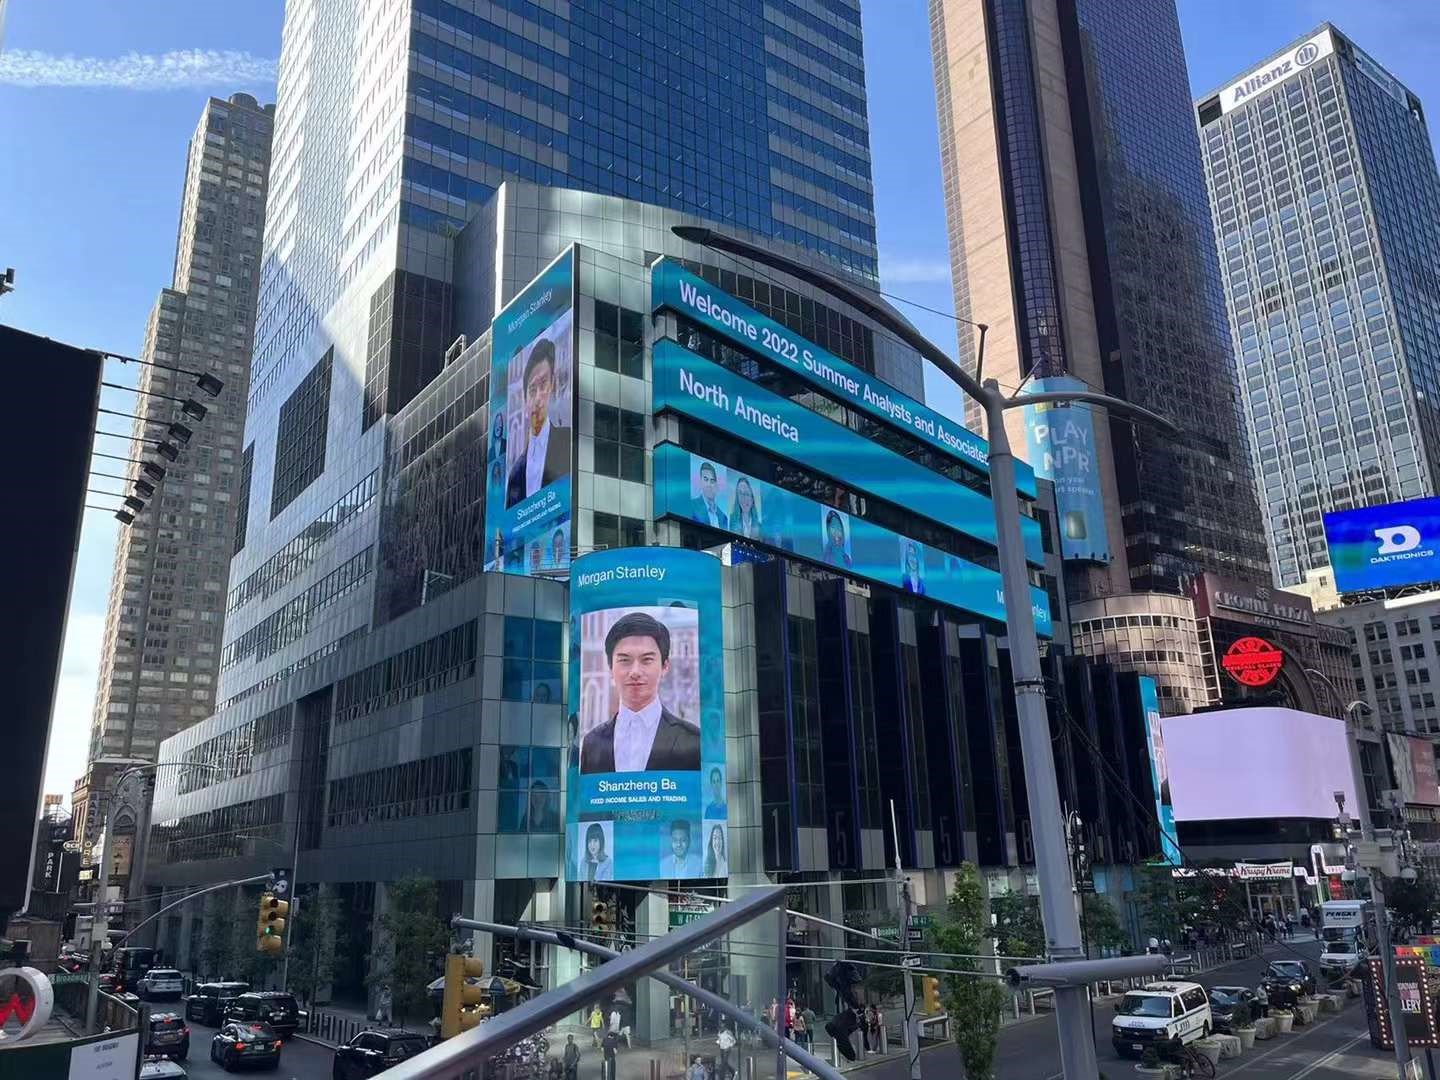 Shanzheng’s photo is shown at Morgan Stanley Headquarters in Times Square 